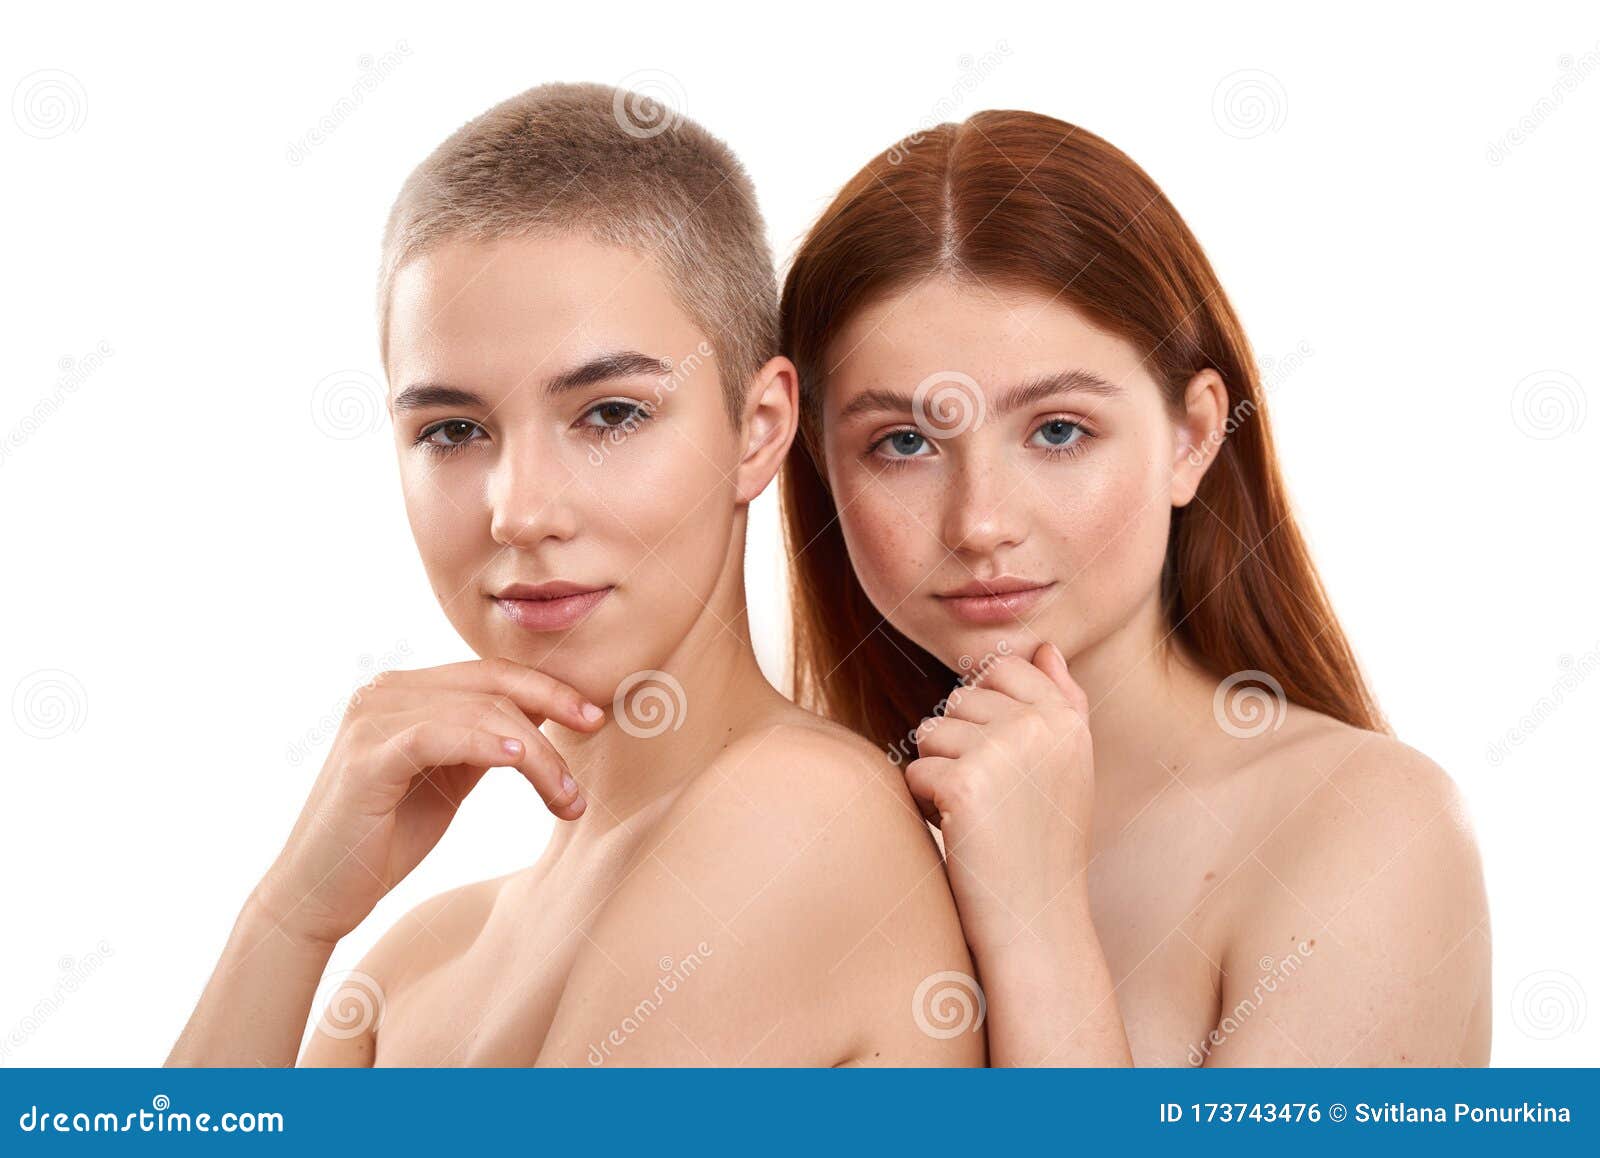 Extremely young naked girls